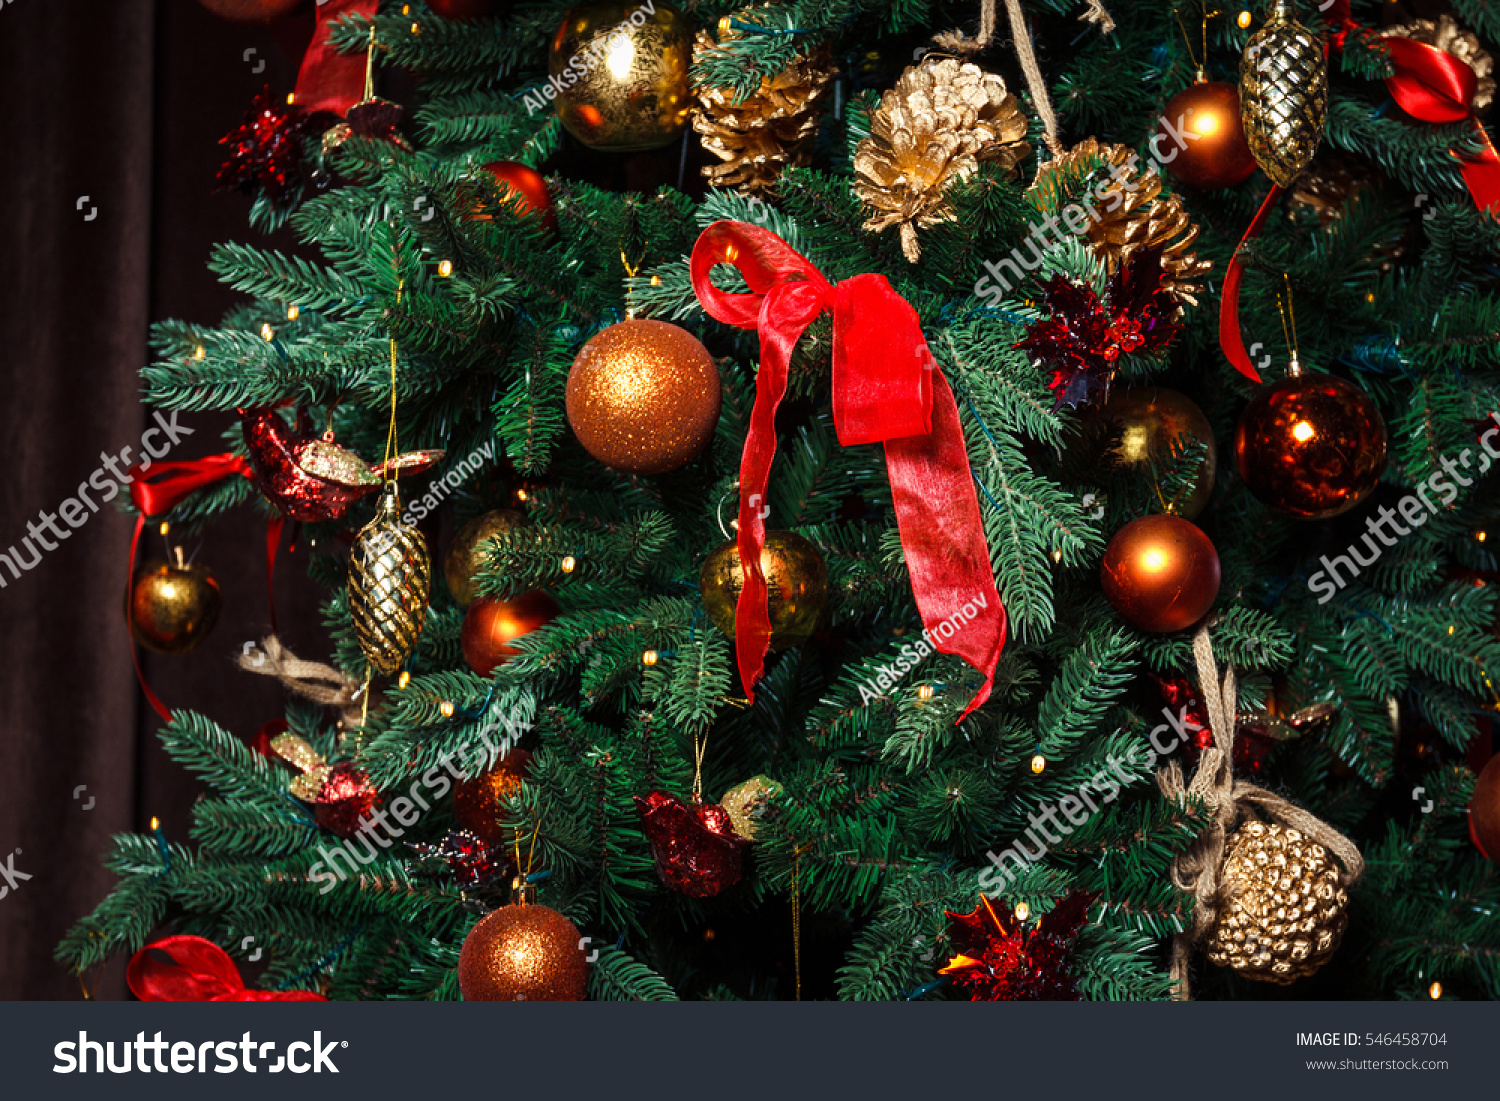 Toys On The Christmas Tree Stock Photo 546458704 : Shutterstock